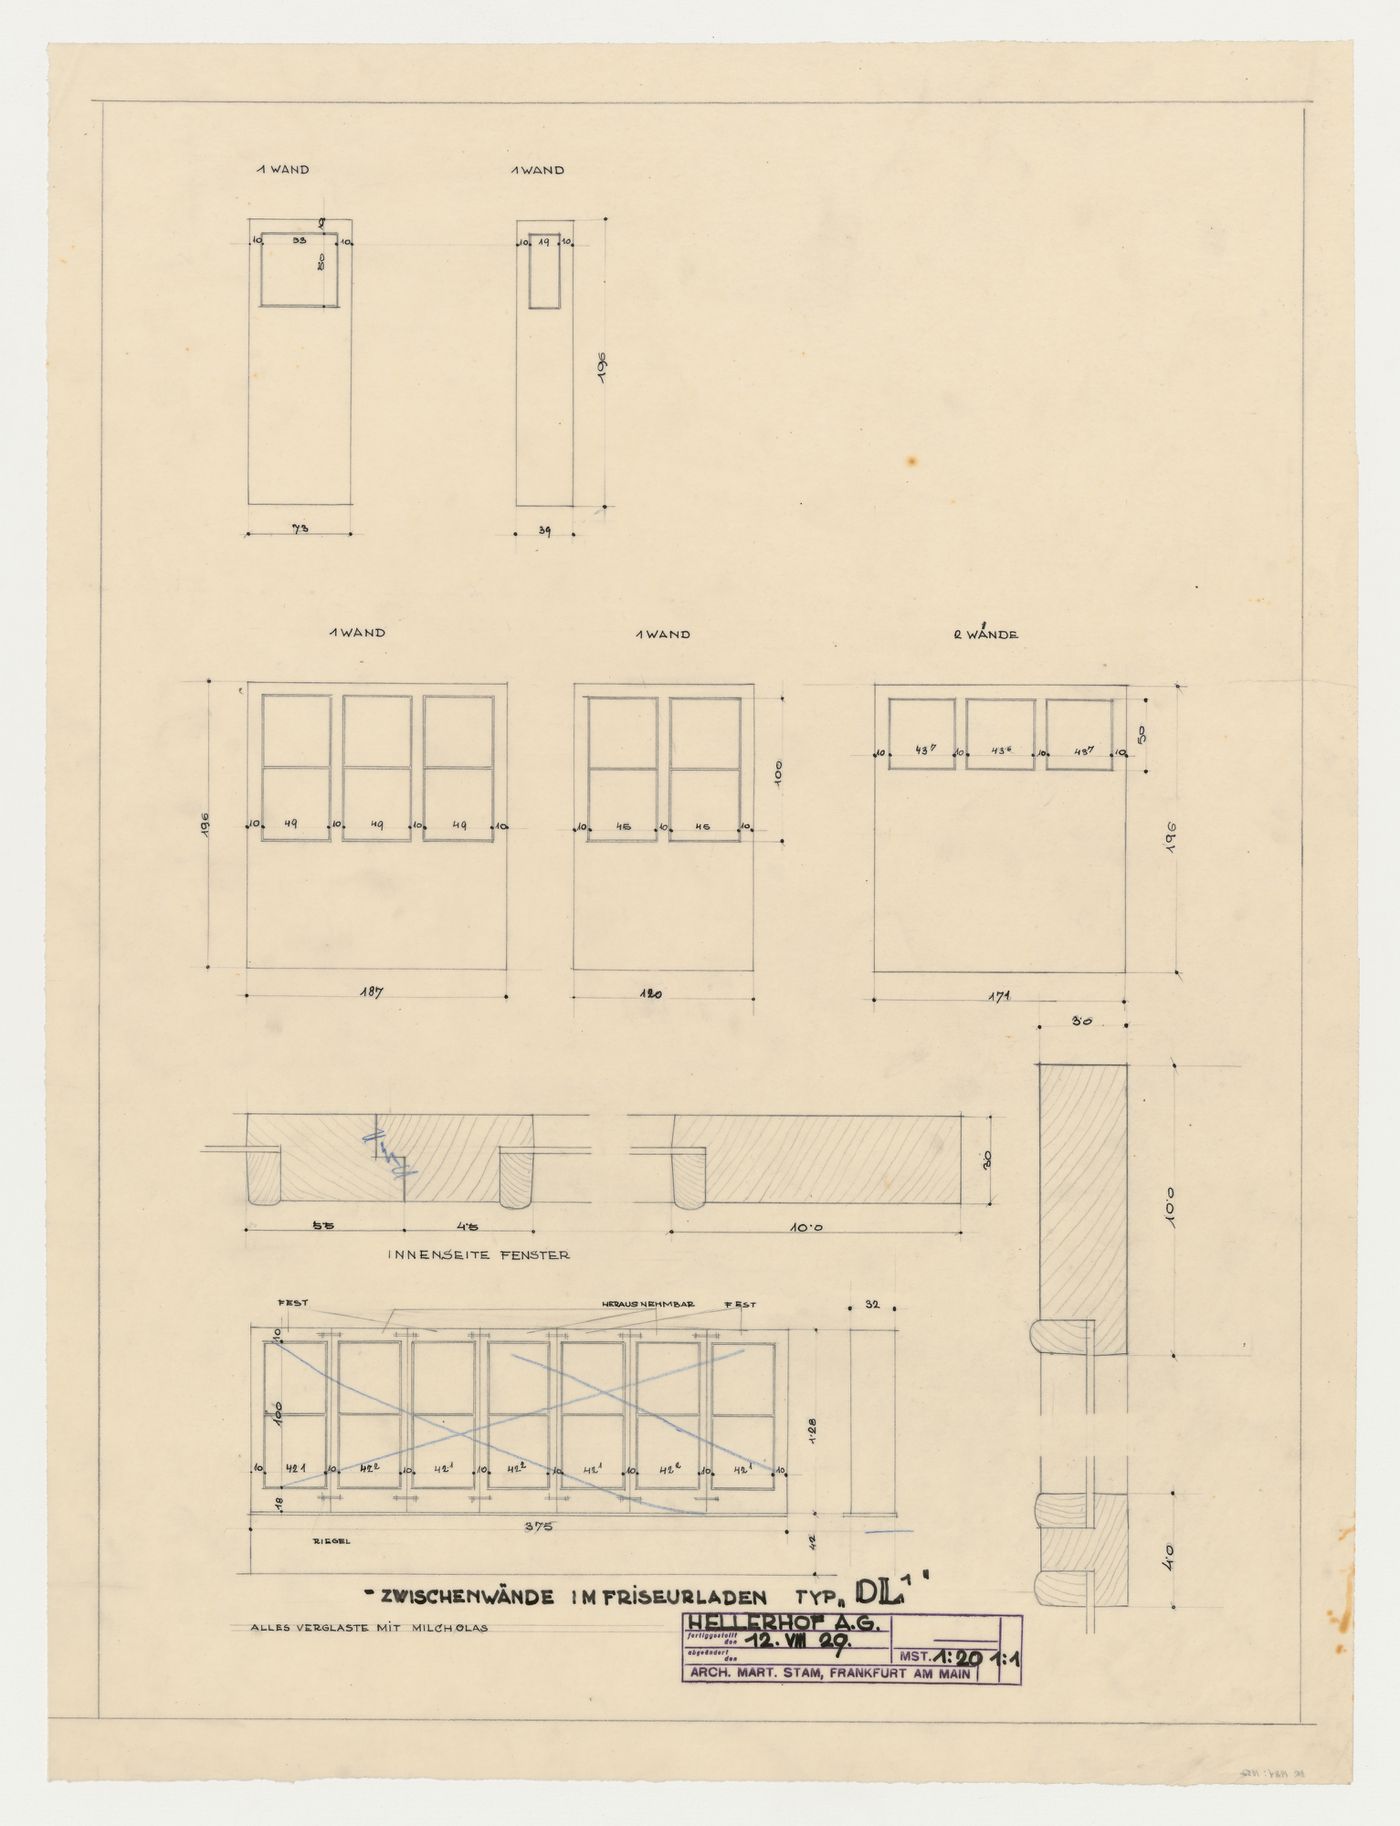 Elevations, and sections for a partition wall in a type DL beauty shop, Hellerhof Housing Estate, Frankfurt am Main, Germany